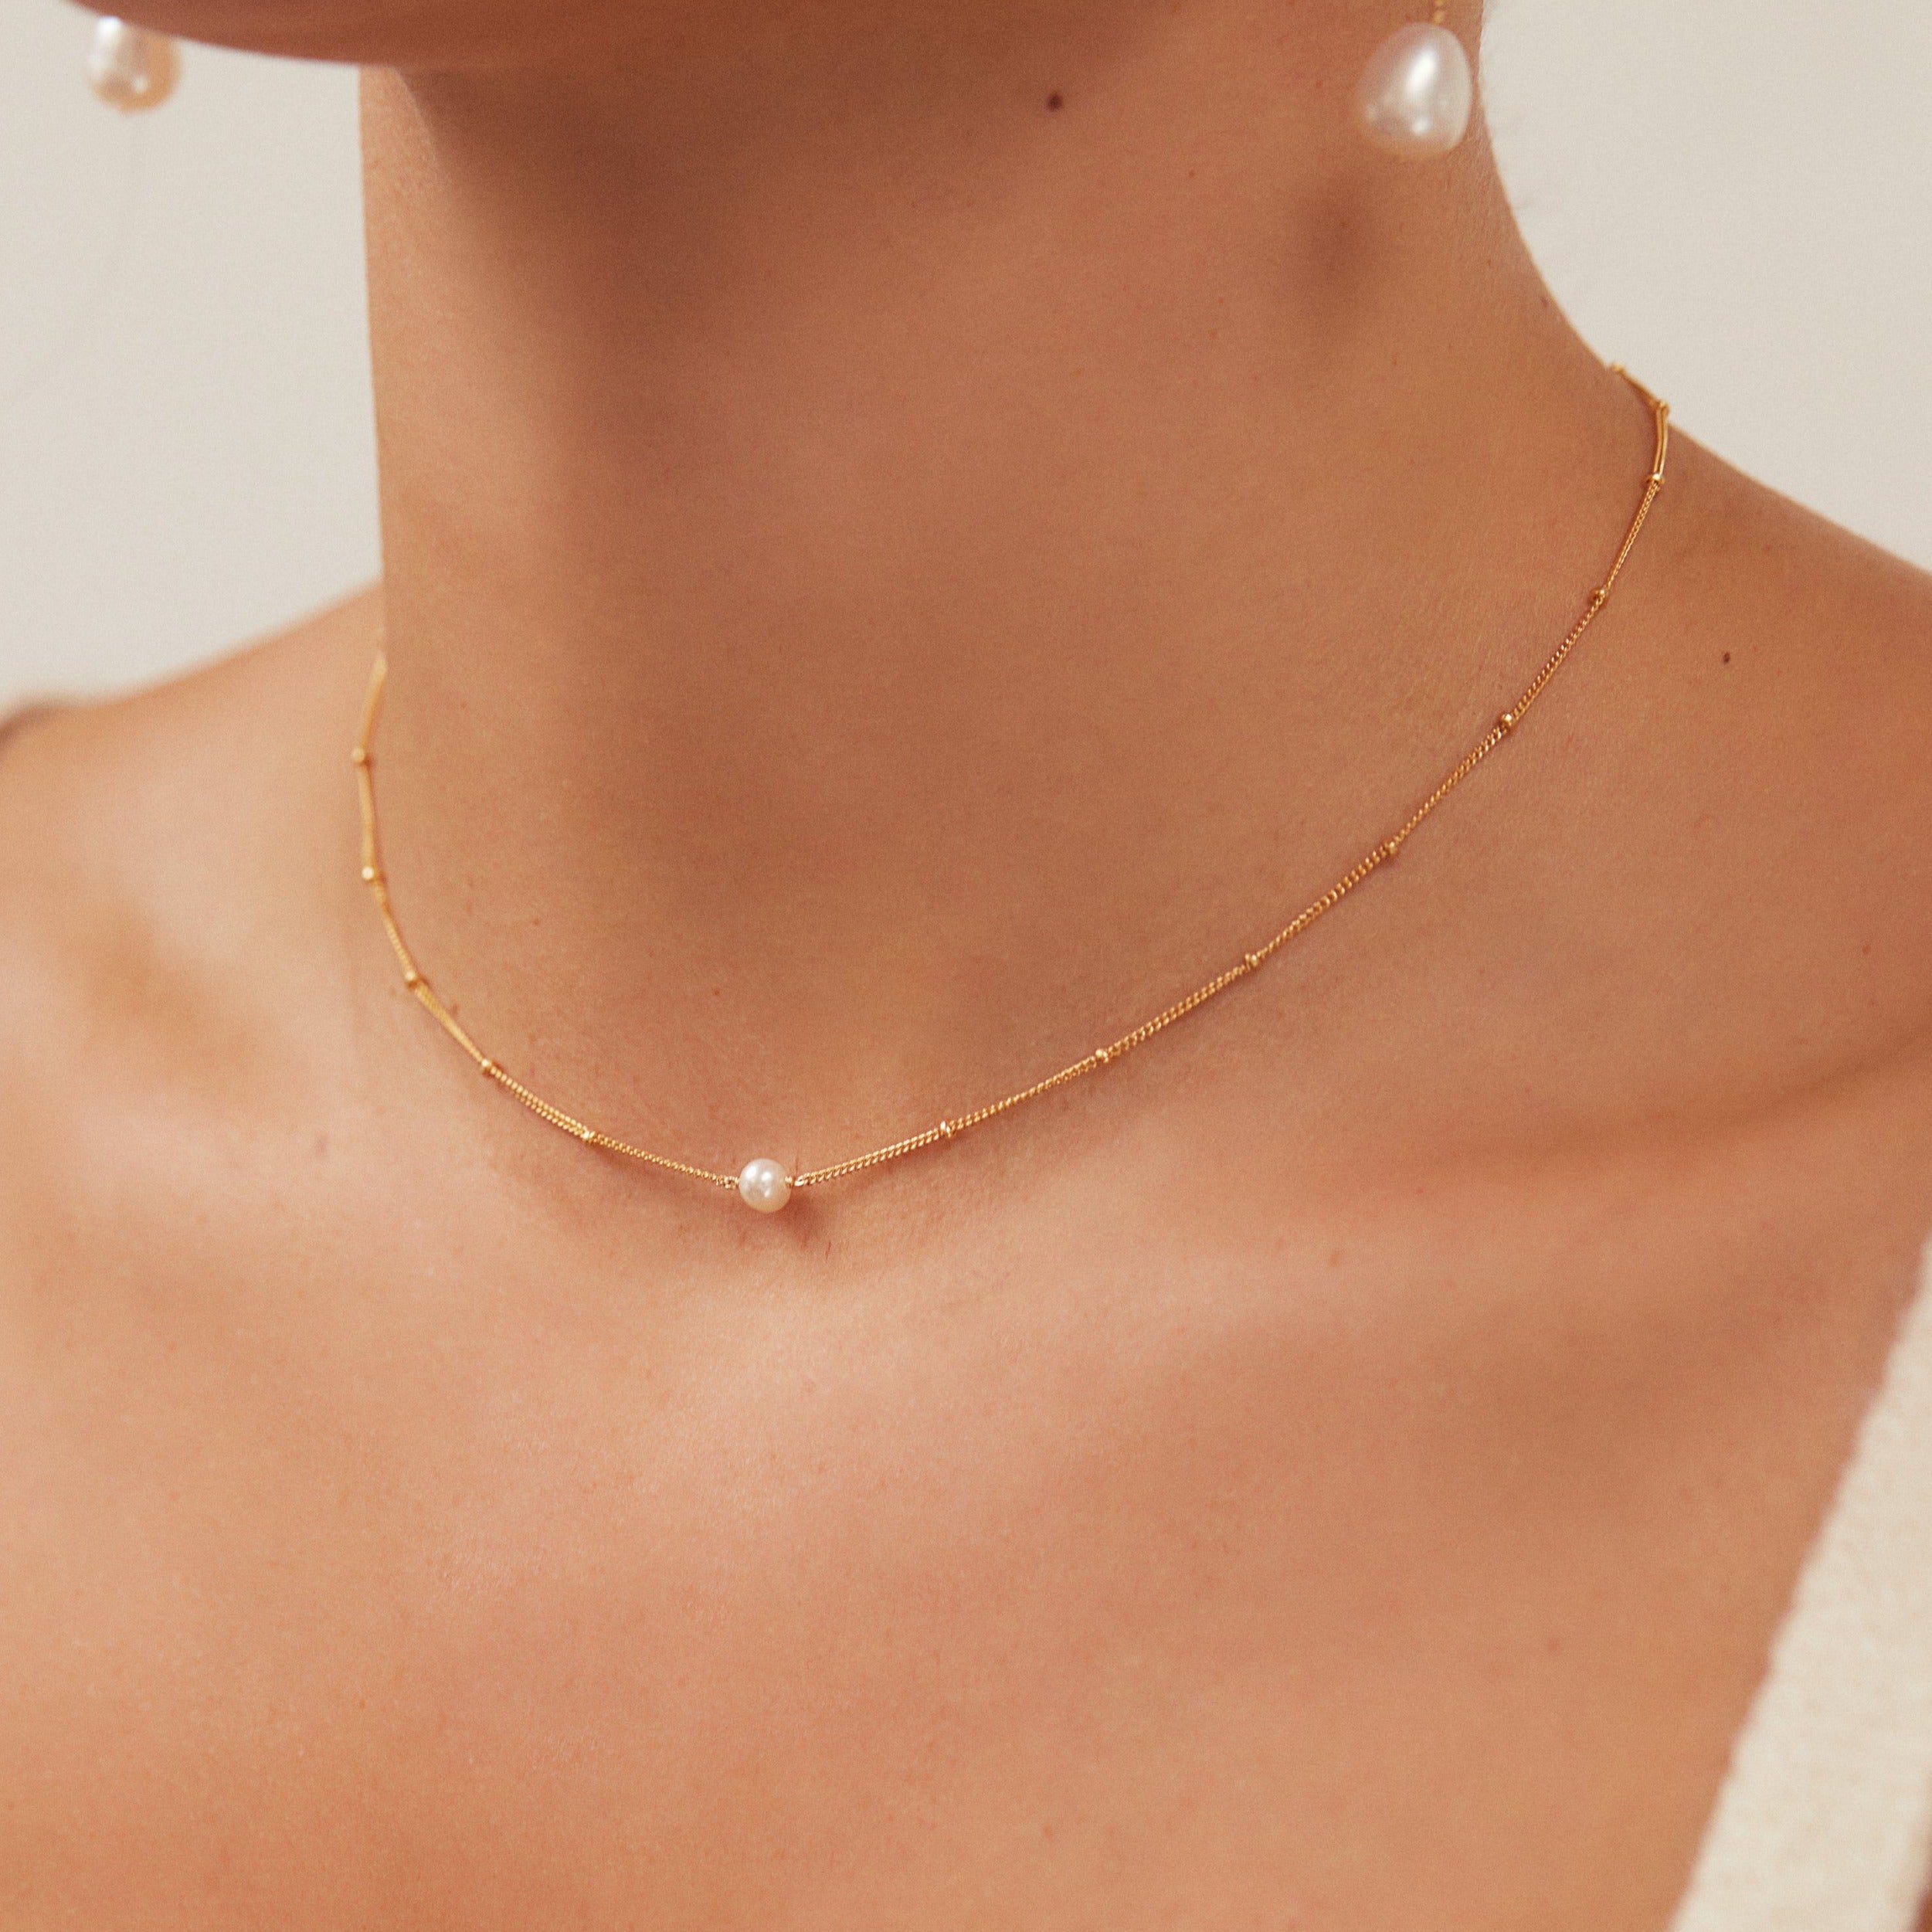 Gold satellite single pearl choker around a neck of a woman also wearing pearl earrings